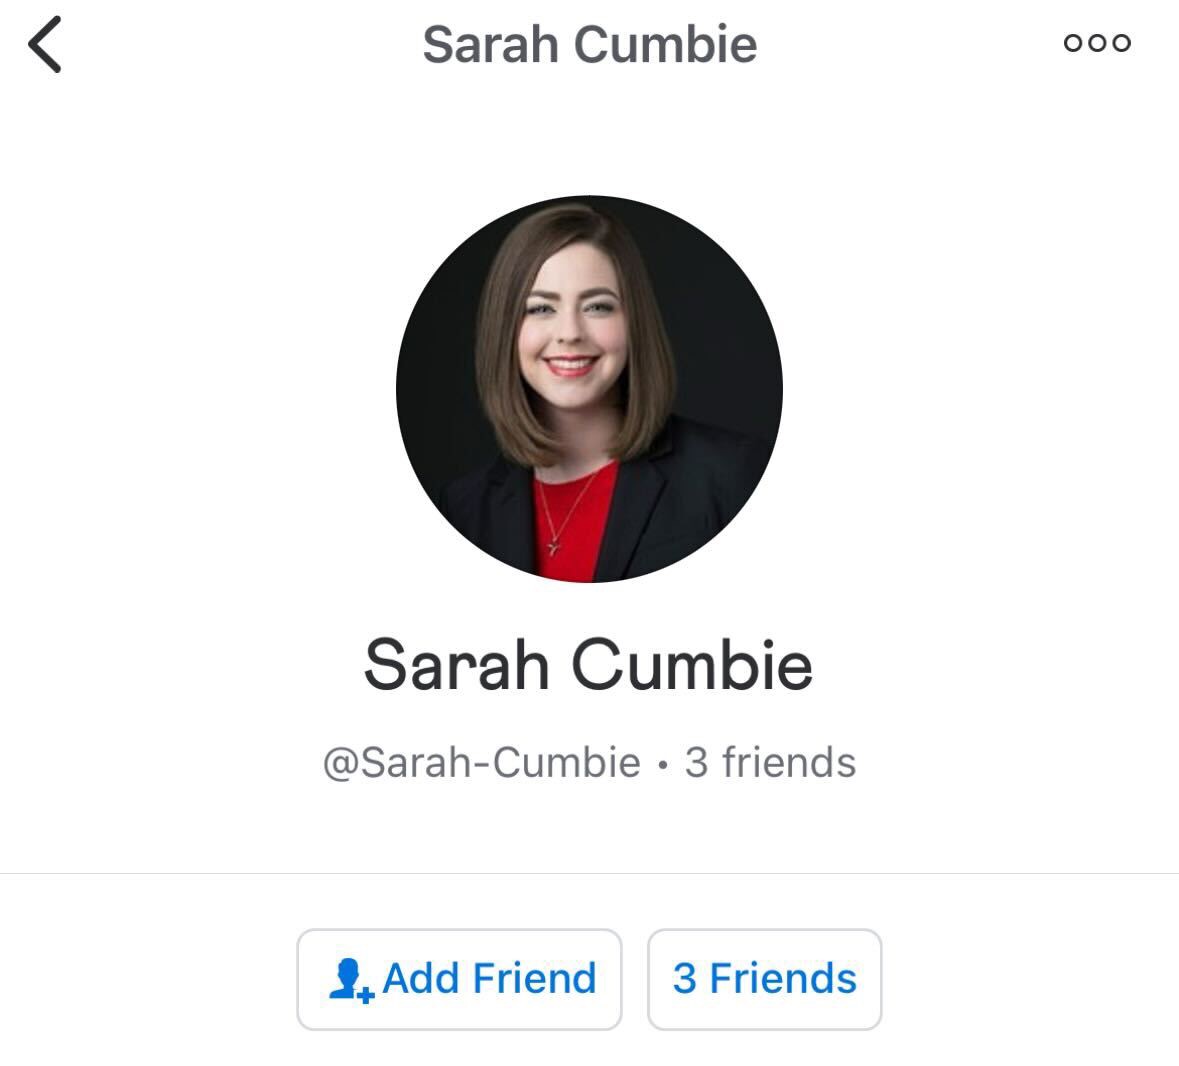 Because some of you asked, you can donate funds to impacted @WeMakeWAMU @wamu885 @DCist staff. Our major gifts officer is collecting donations on Venmo ✊🏾: @ Sarah-Cumbie